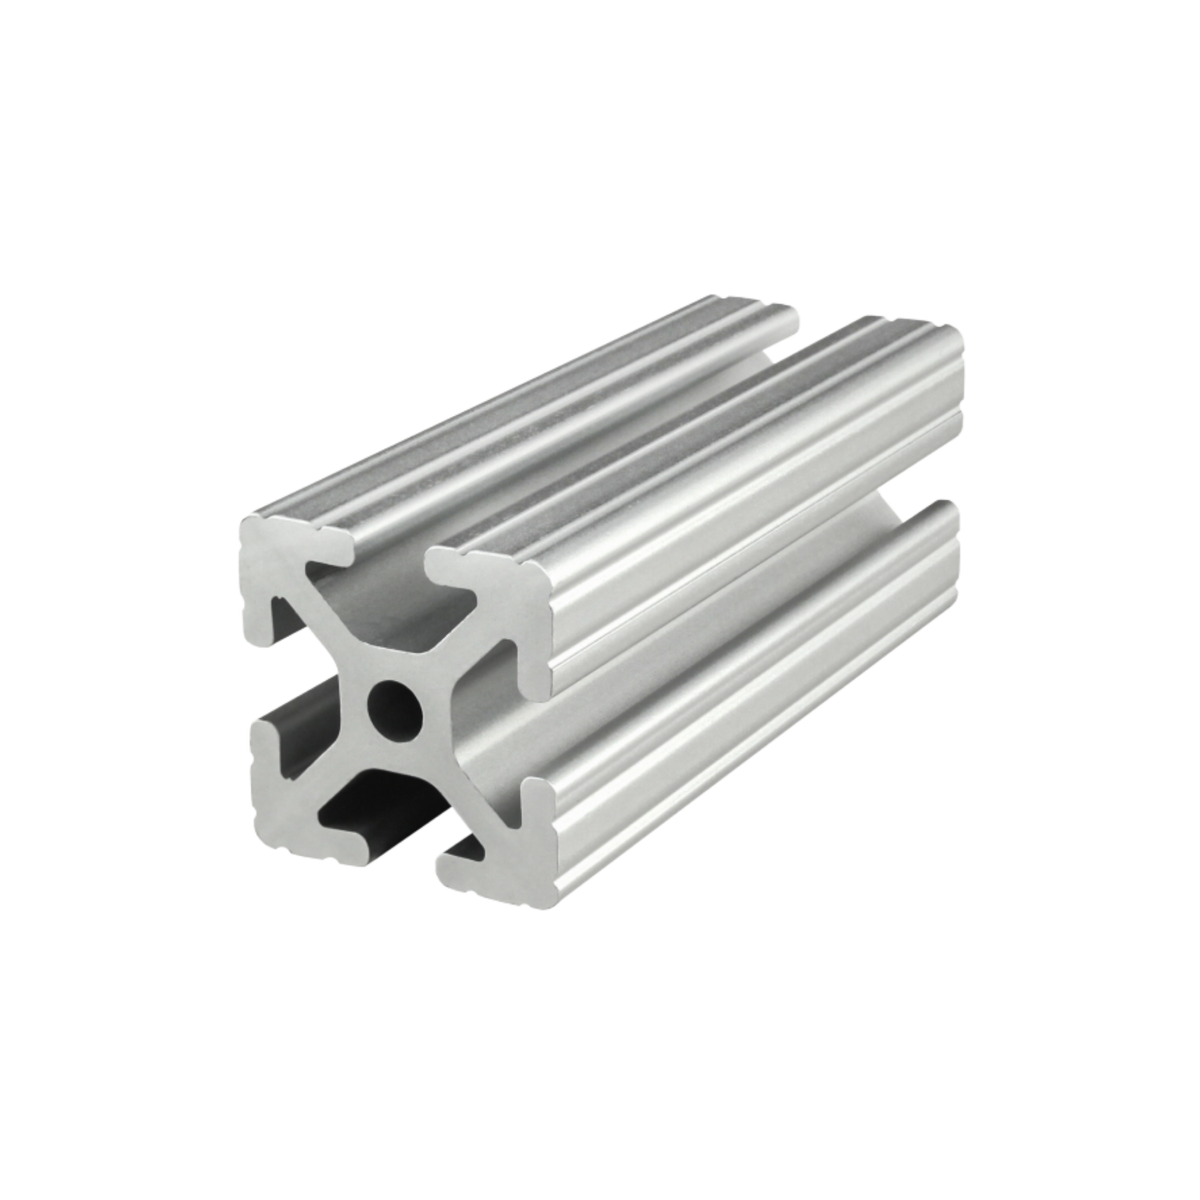 metal squared 80/20 bar with a T-slot along each side